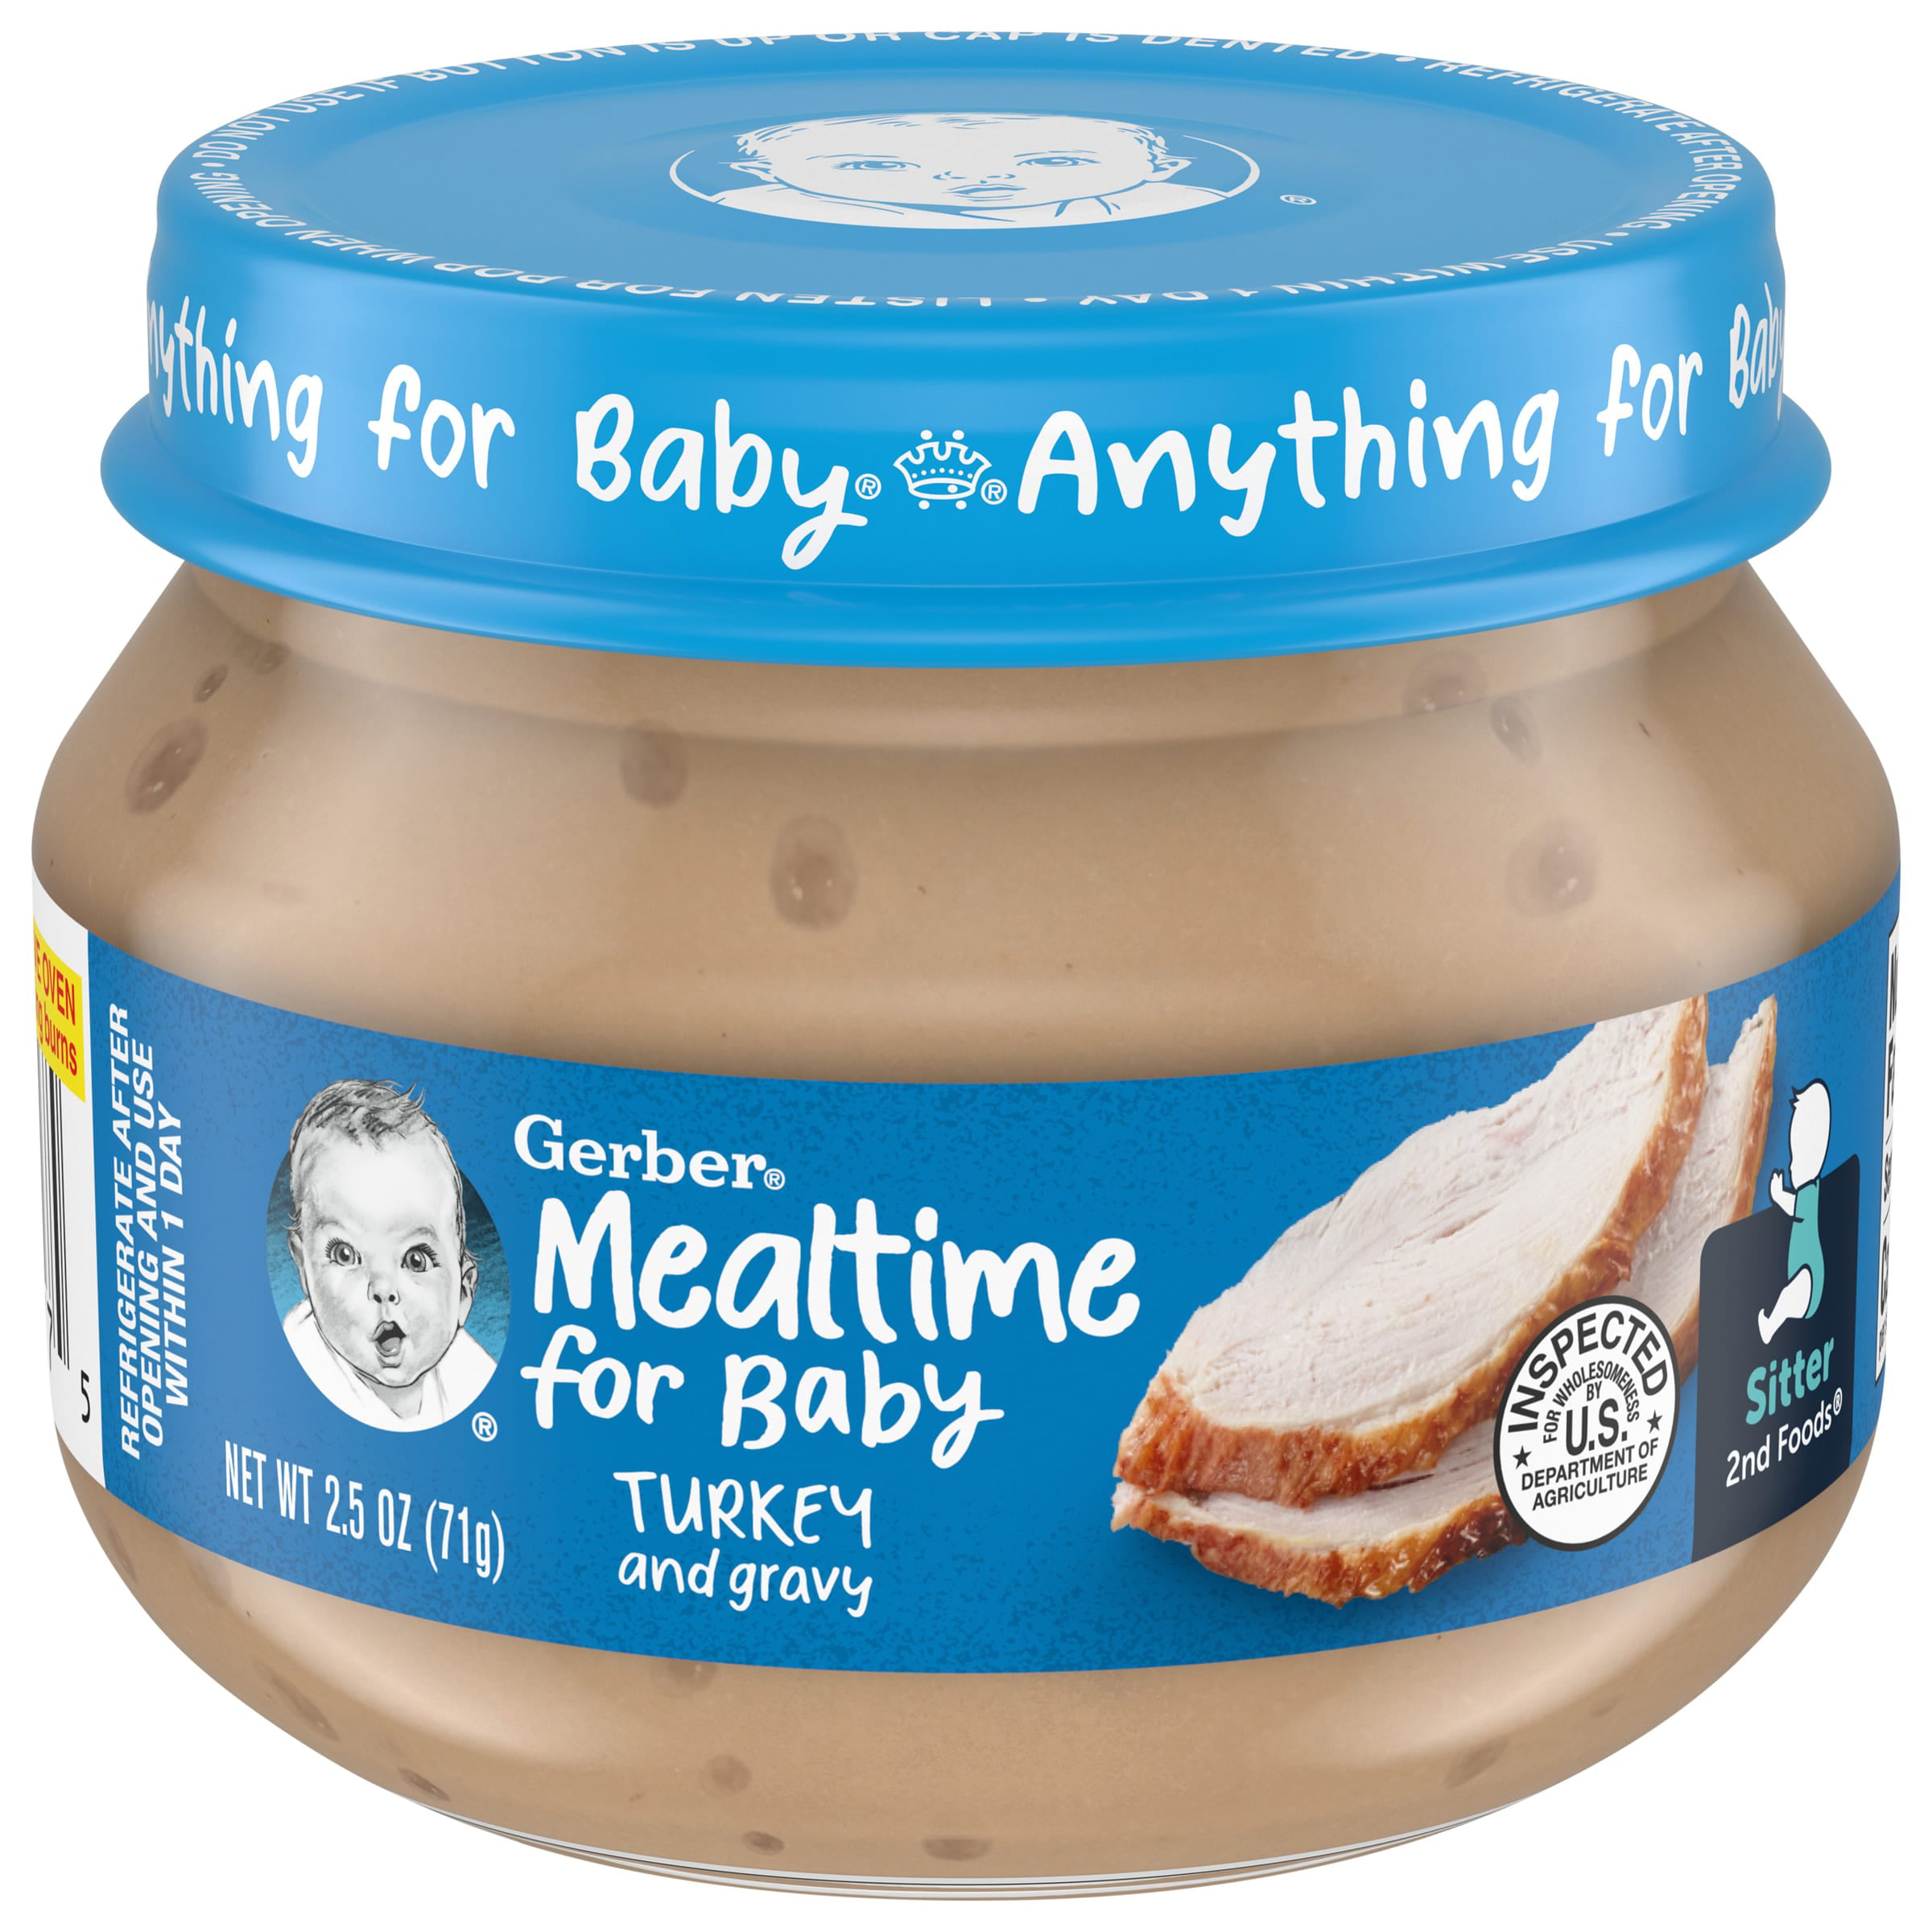 Gerber Stage 2 Baby Food, Turkey and Gravy, 2.5 oz glass jar (Pack of 10)